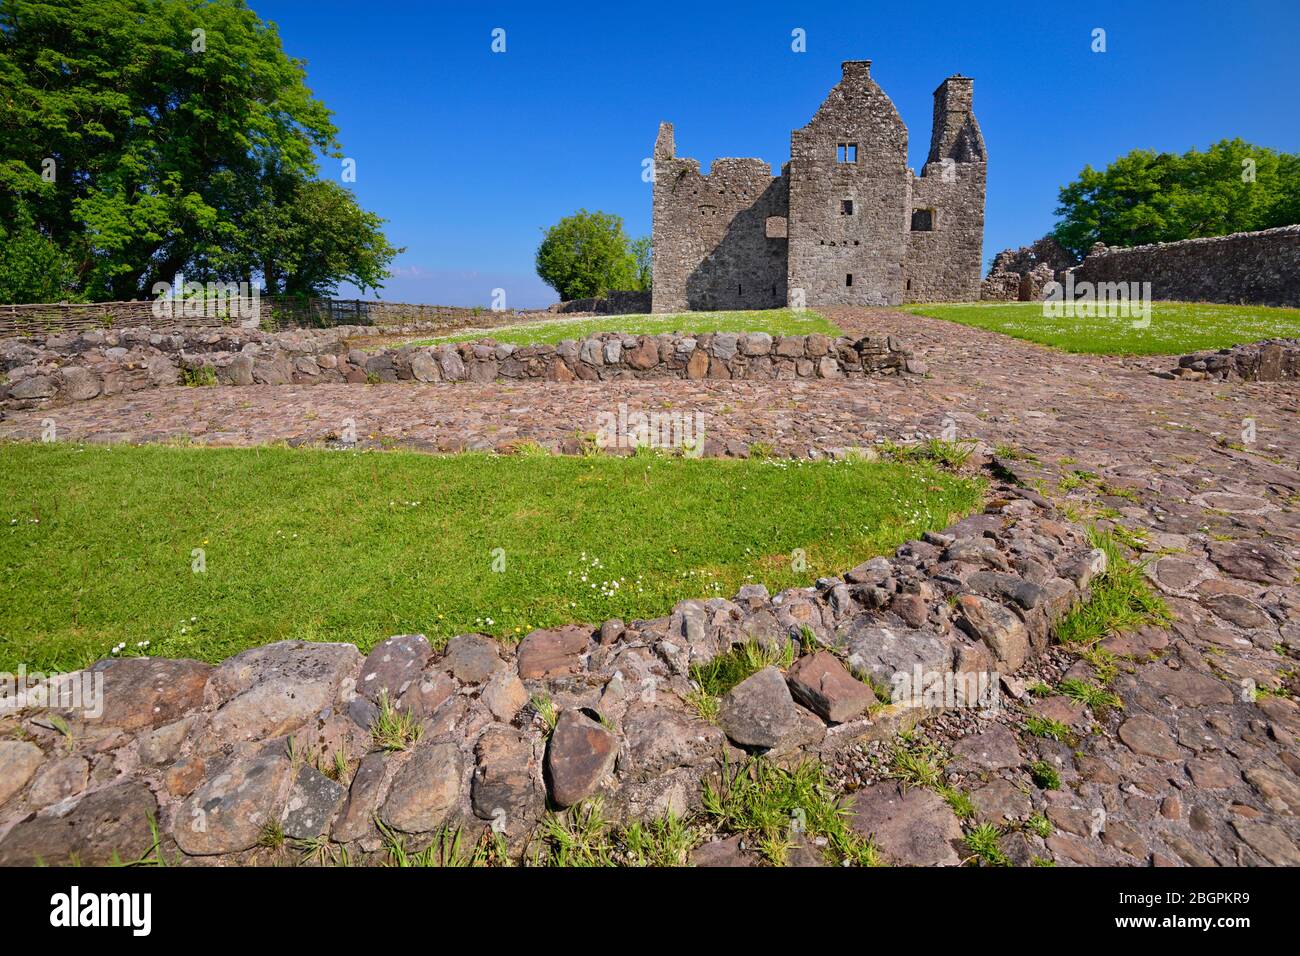 Ireland, County Fermanagh,  Ruin of Tully Castle on the shores of Lough Erne which was a fortified house with a rectangular bawn built for Sir John Hume, a Scottish planter, in 1619. Stock Photo